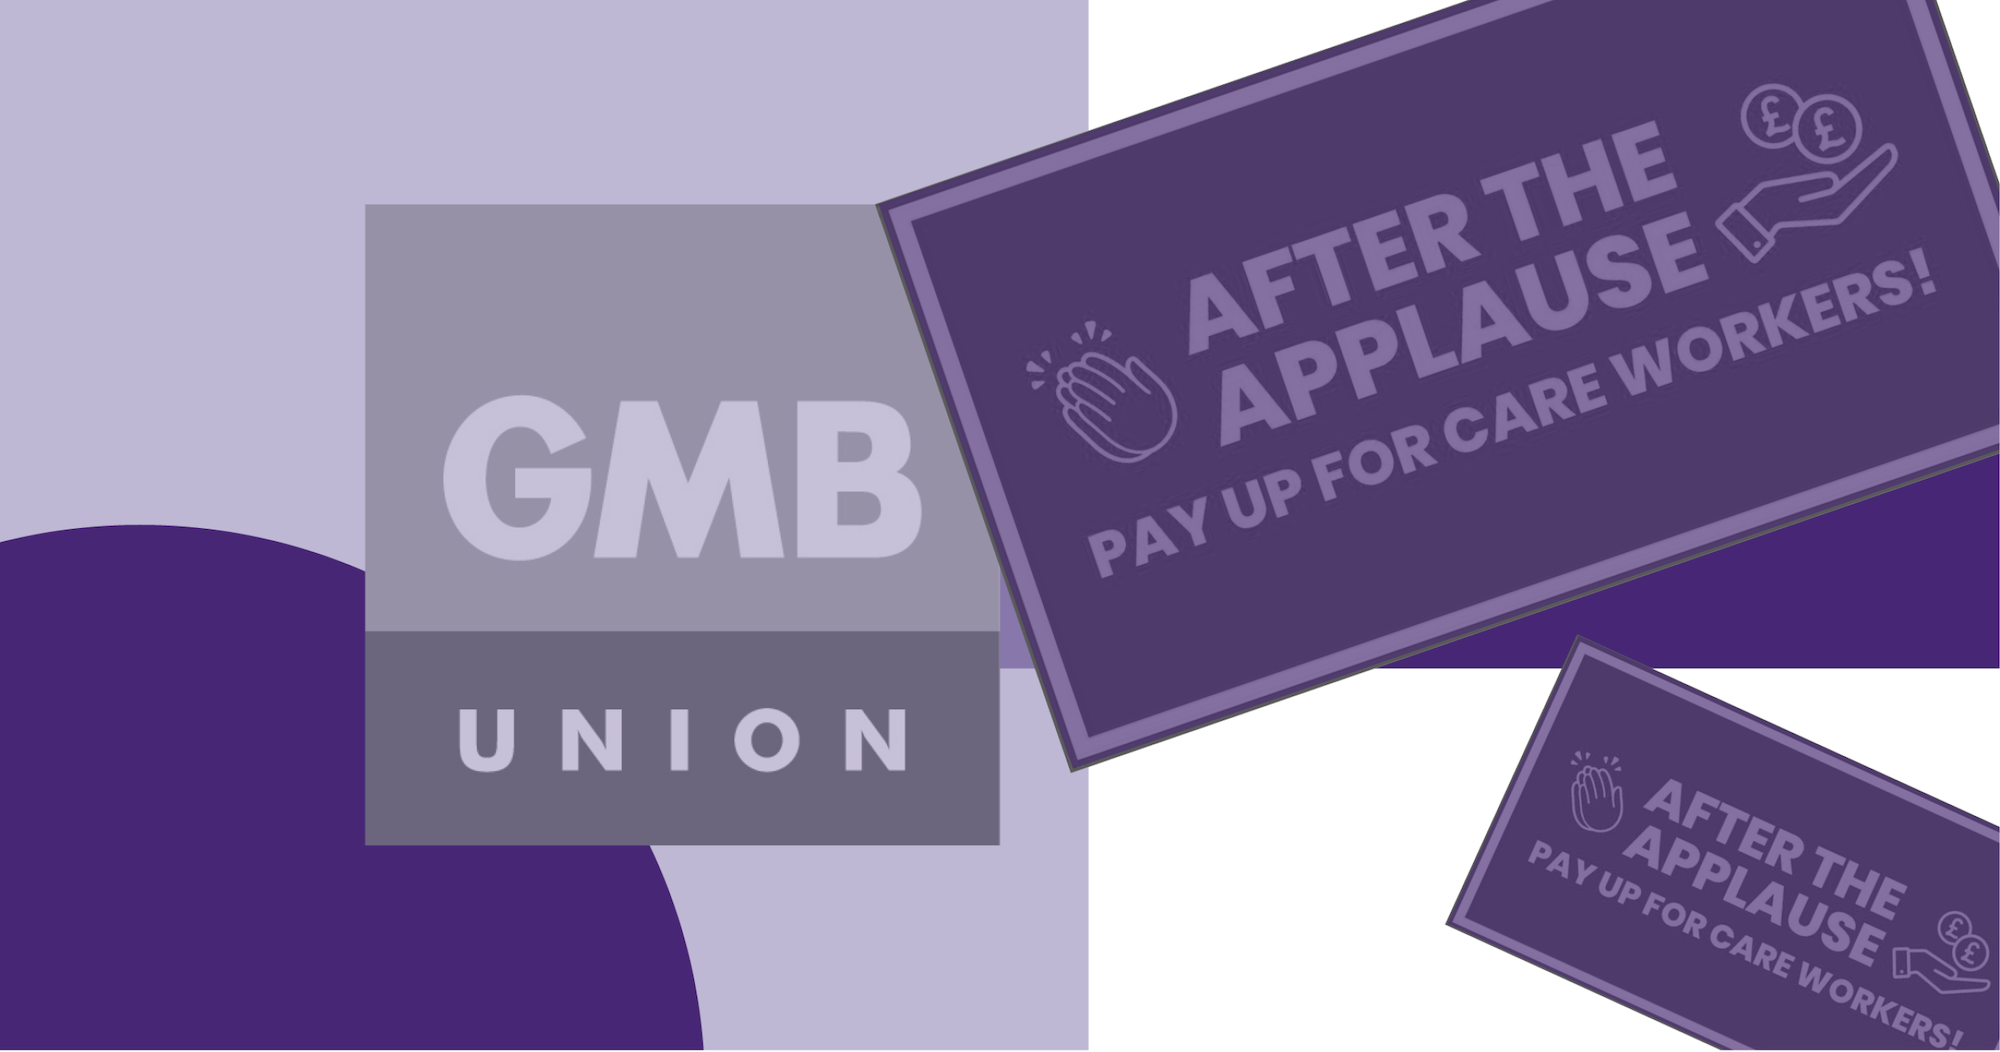 Signs supporting GMB Scotlands campaign for a Scottish carers wage with shaded purple design